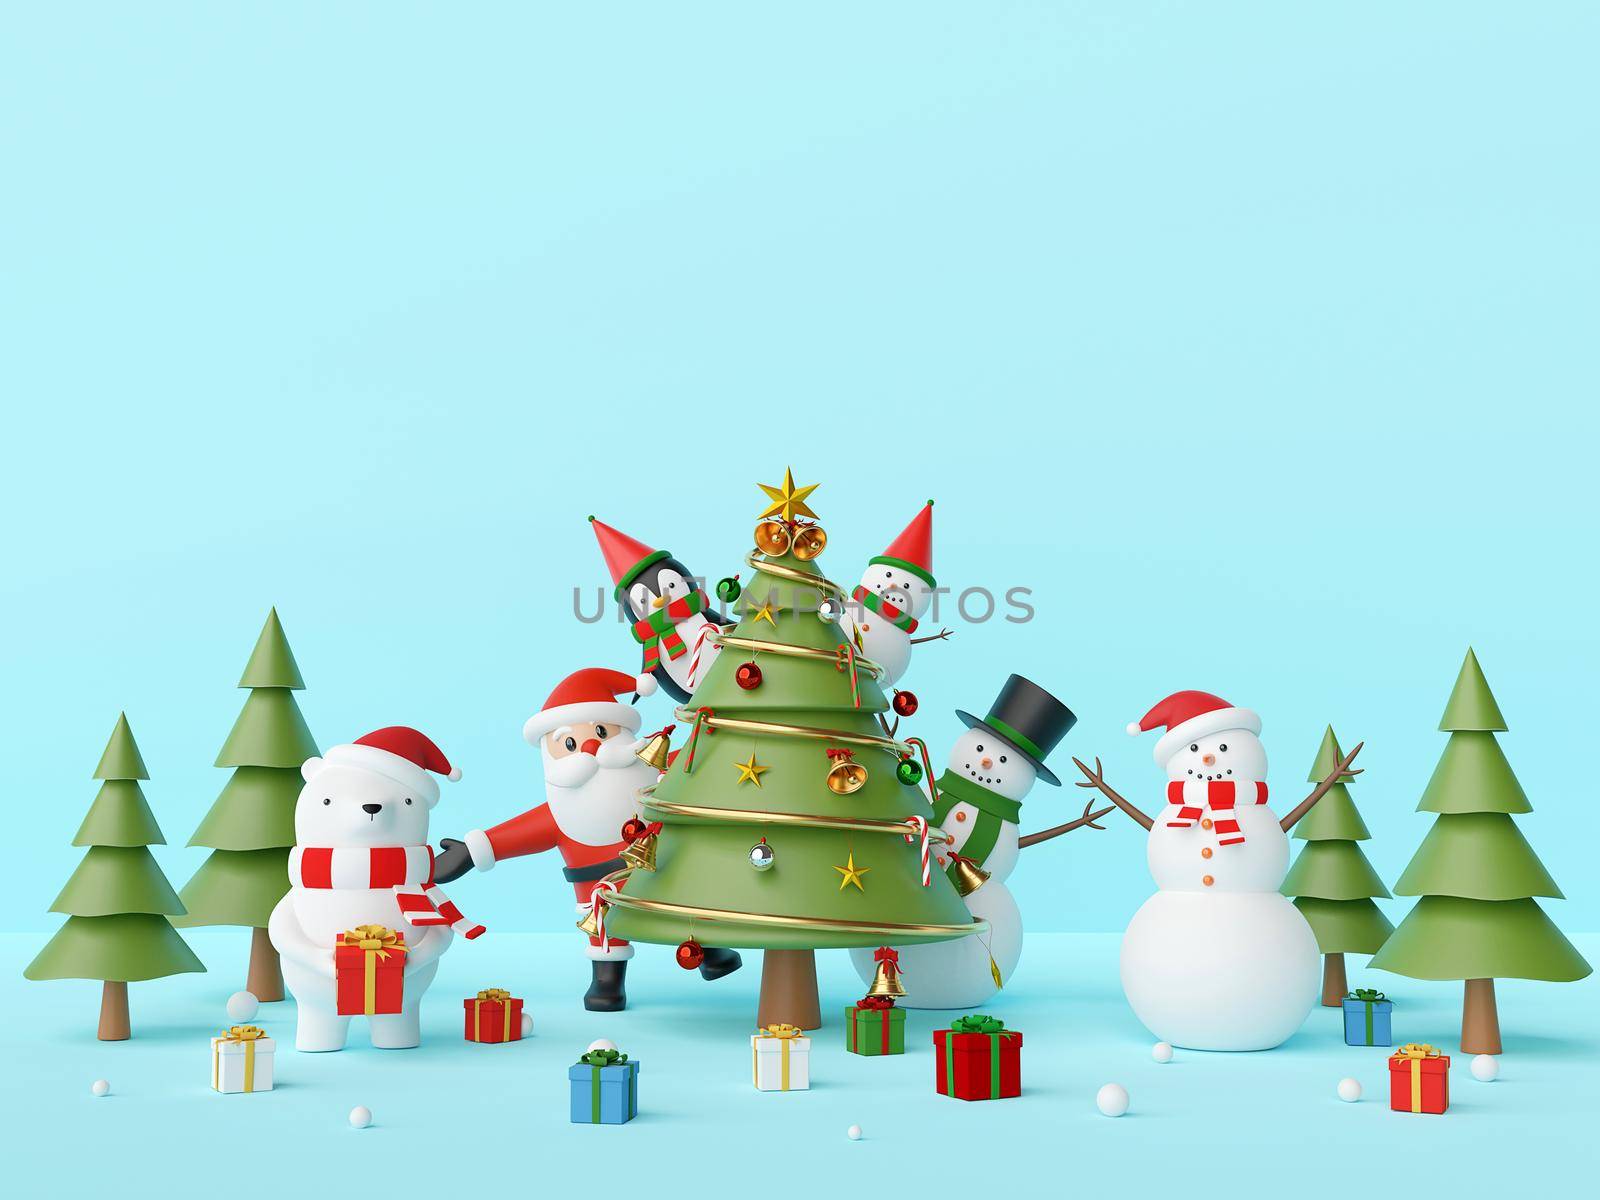 Merry Christmas and Happy New Year, Christmas party Santa Claus and friend with Christmas tree on a blue background, 3d rendering by nutzchotwarut